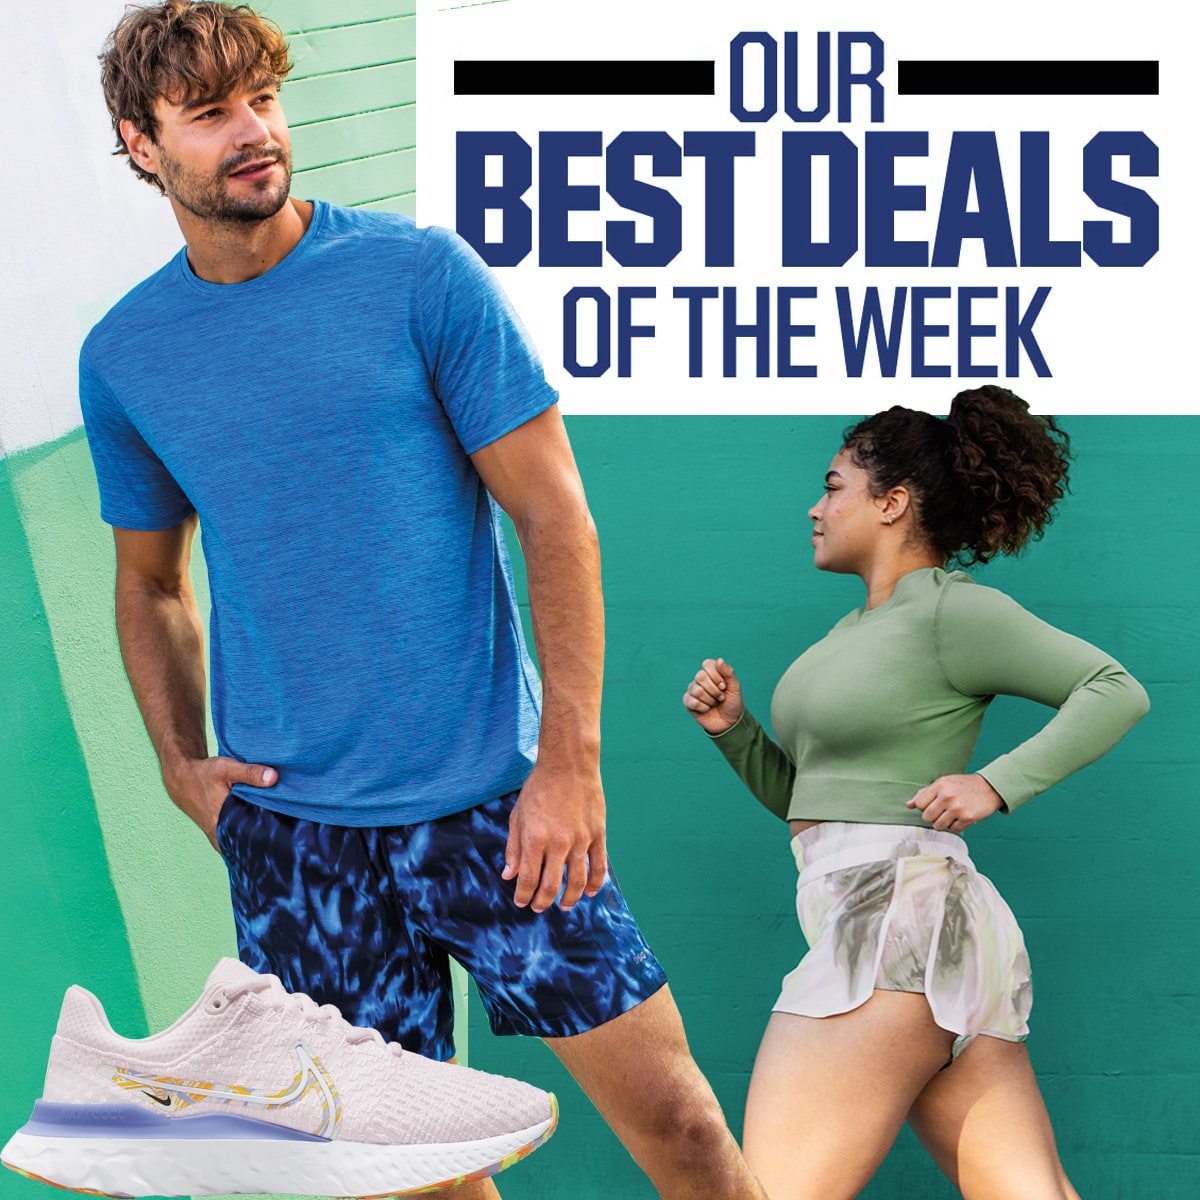 Our best deals of the week.